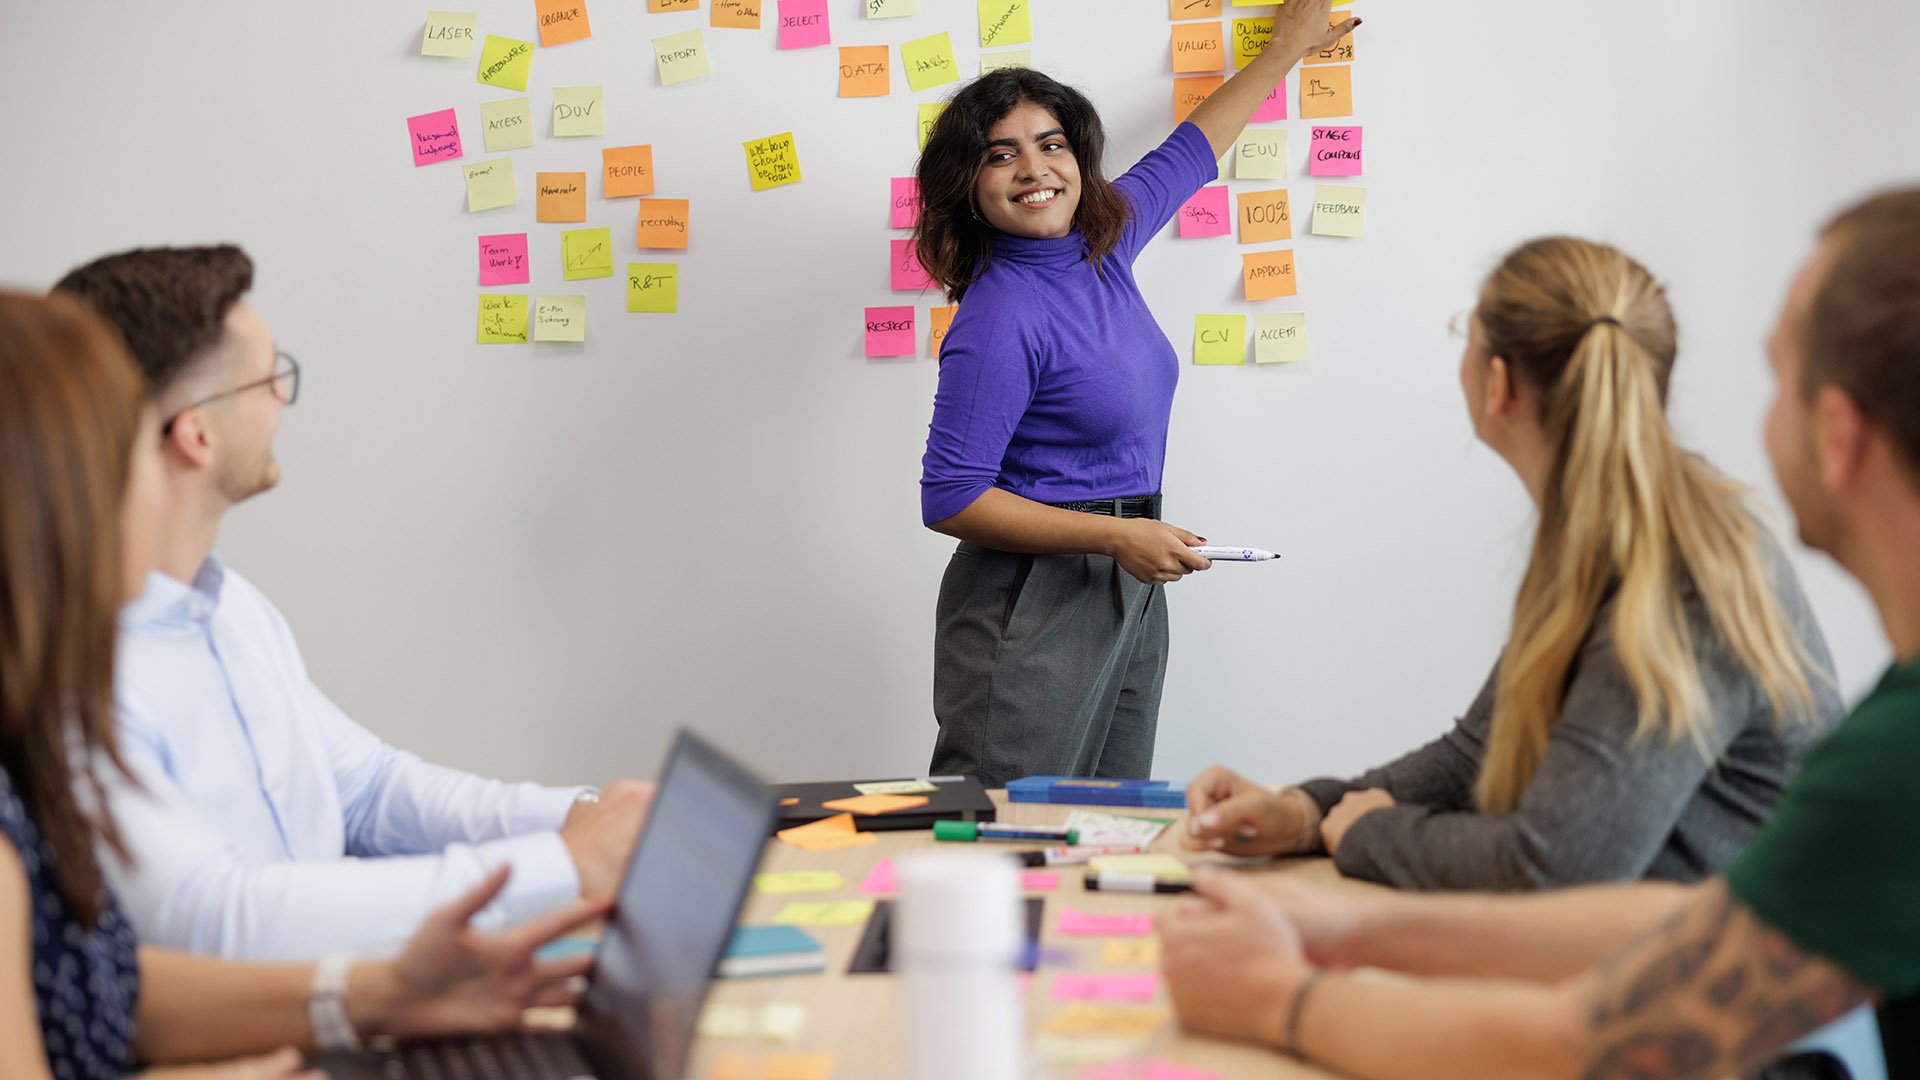 ASML employees are seen having a brainstorming session. A woman is pointing at the sticky notes on a white board. 